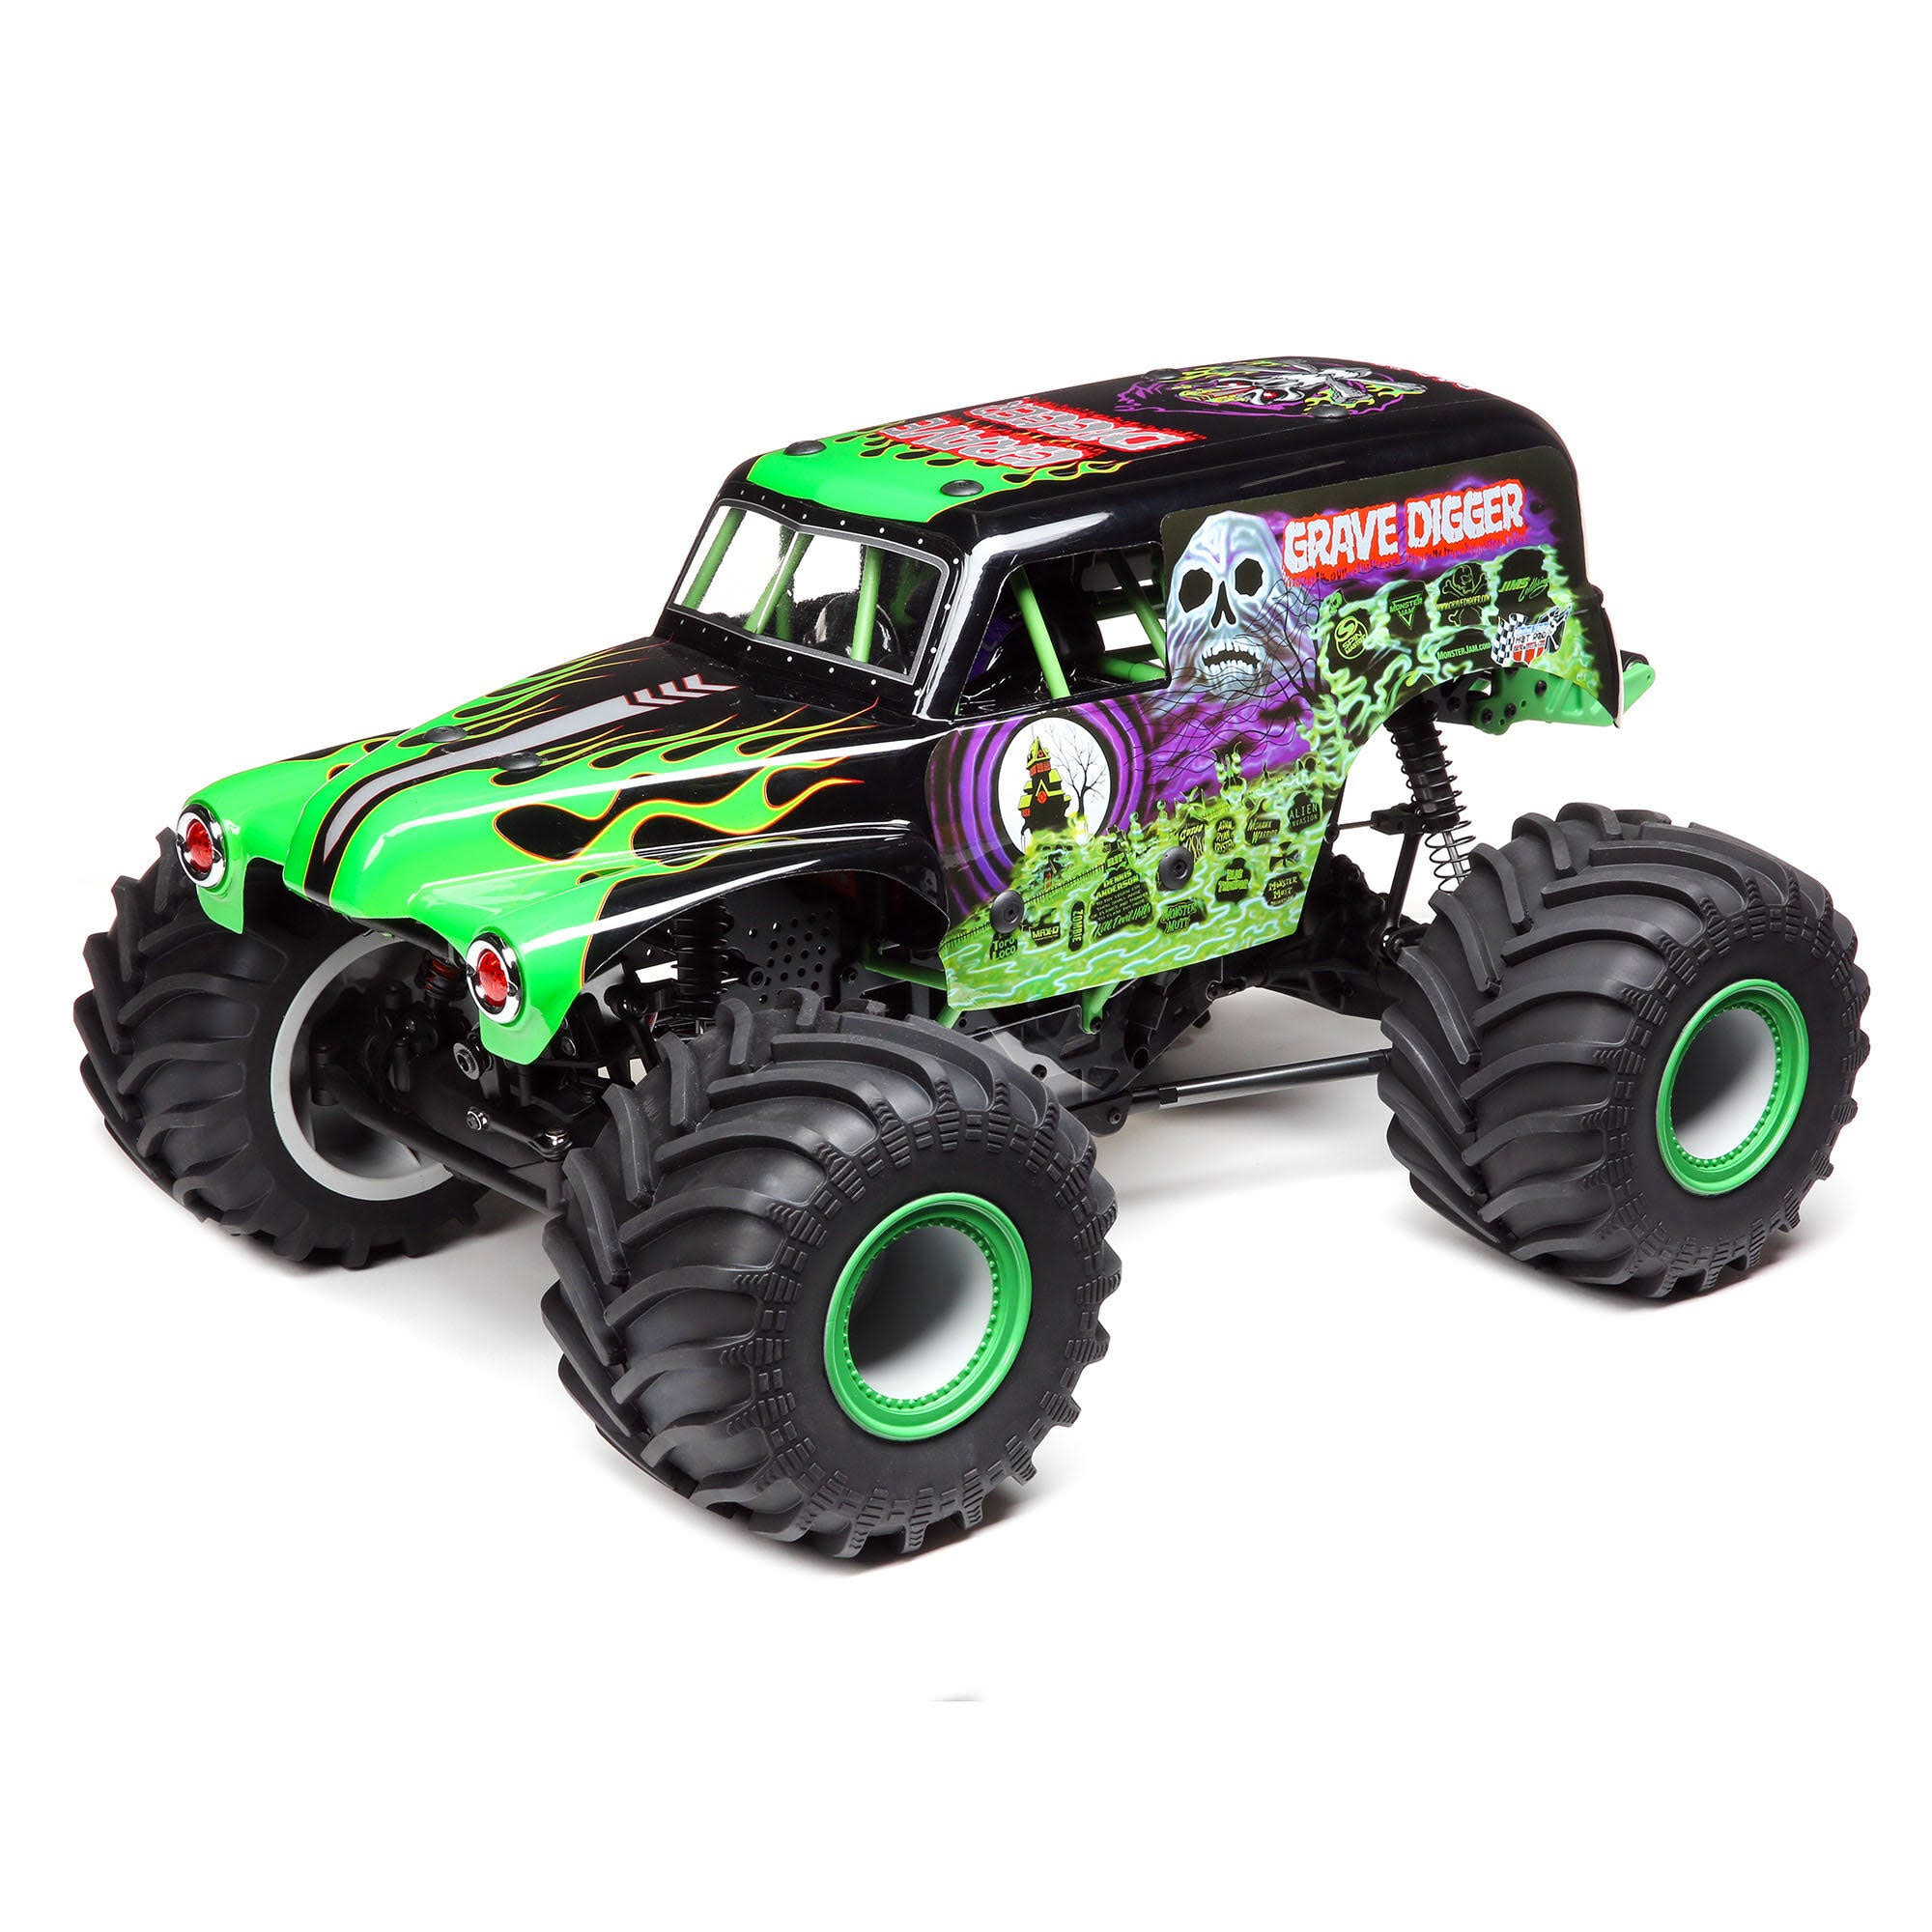 Losi LMT Grave Digger Solid Axle Monster Truck RTR - LOS04021T1